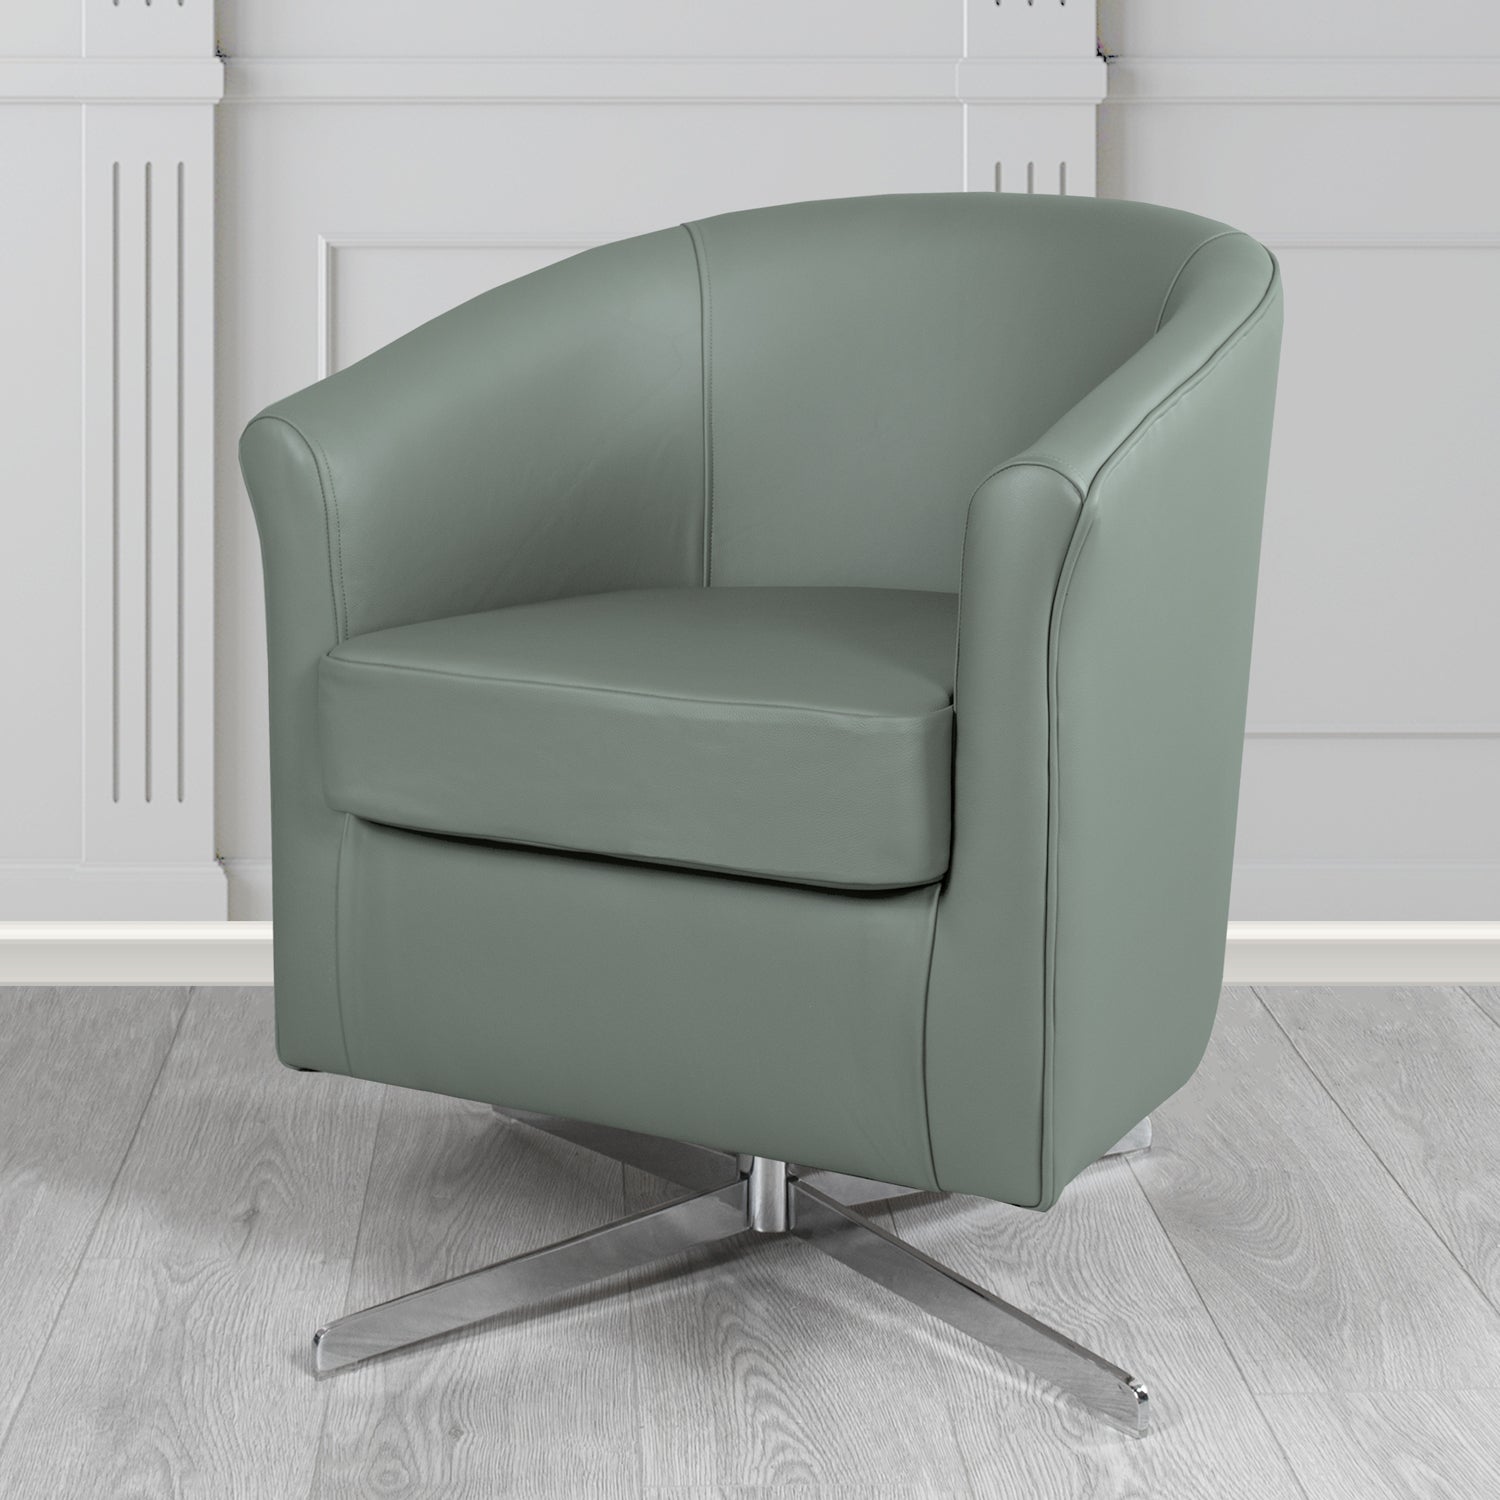 Cannes Swivel Tub Chair in Shelly Piping Crib 5 Genuine Leather - The Tub Chair Shop